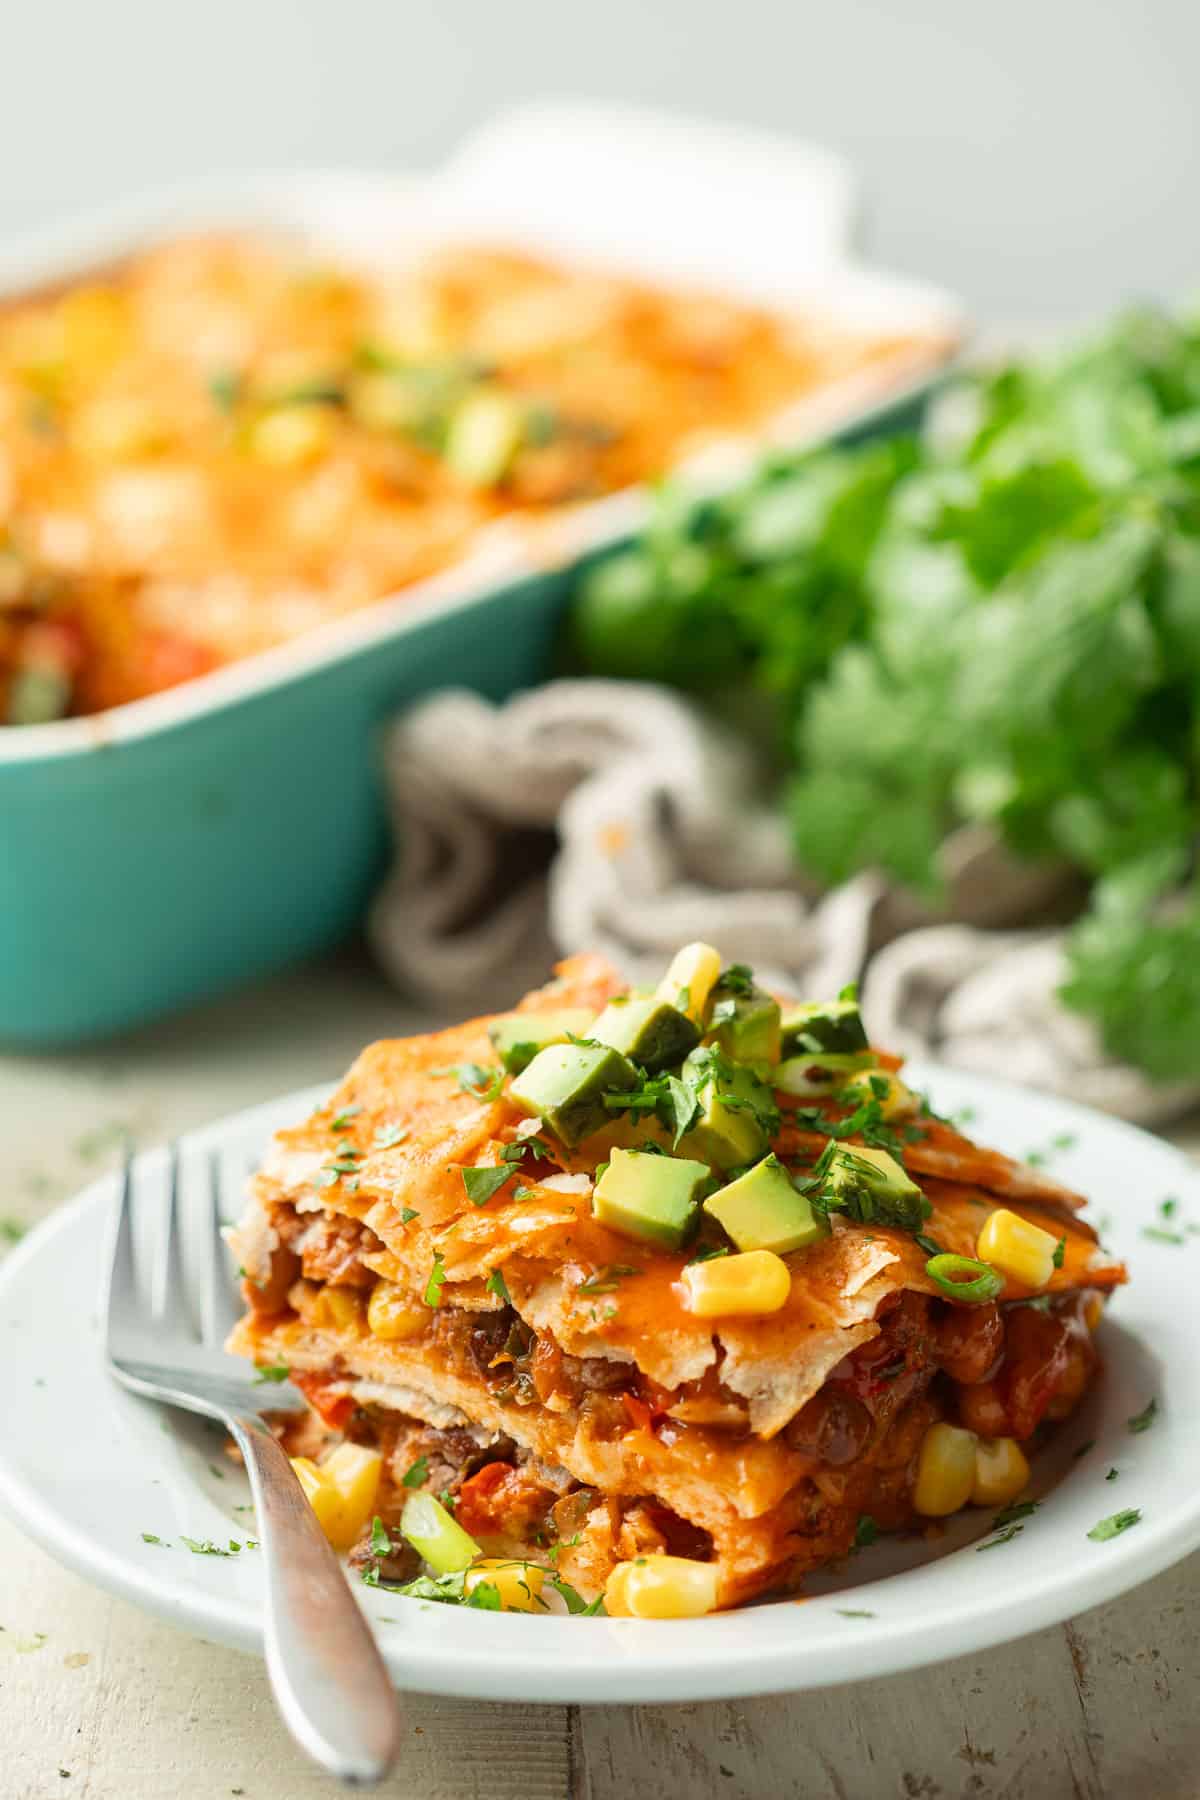 Slice of Vegan Enchilada Casserole on a plate with baking dish and bunch of cilantro in the background.